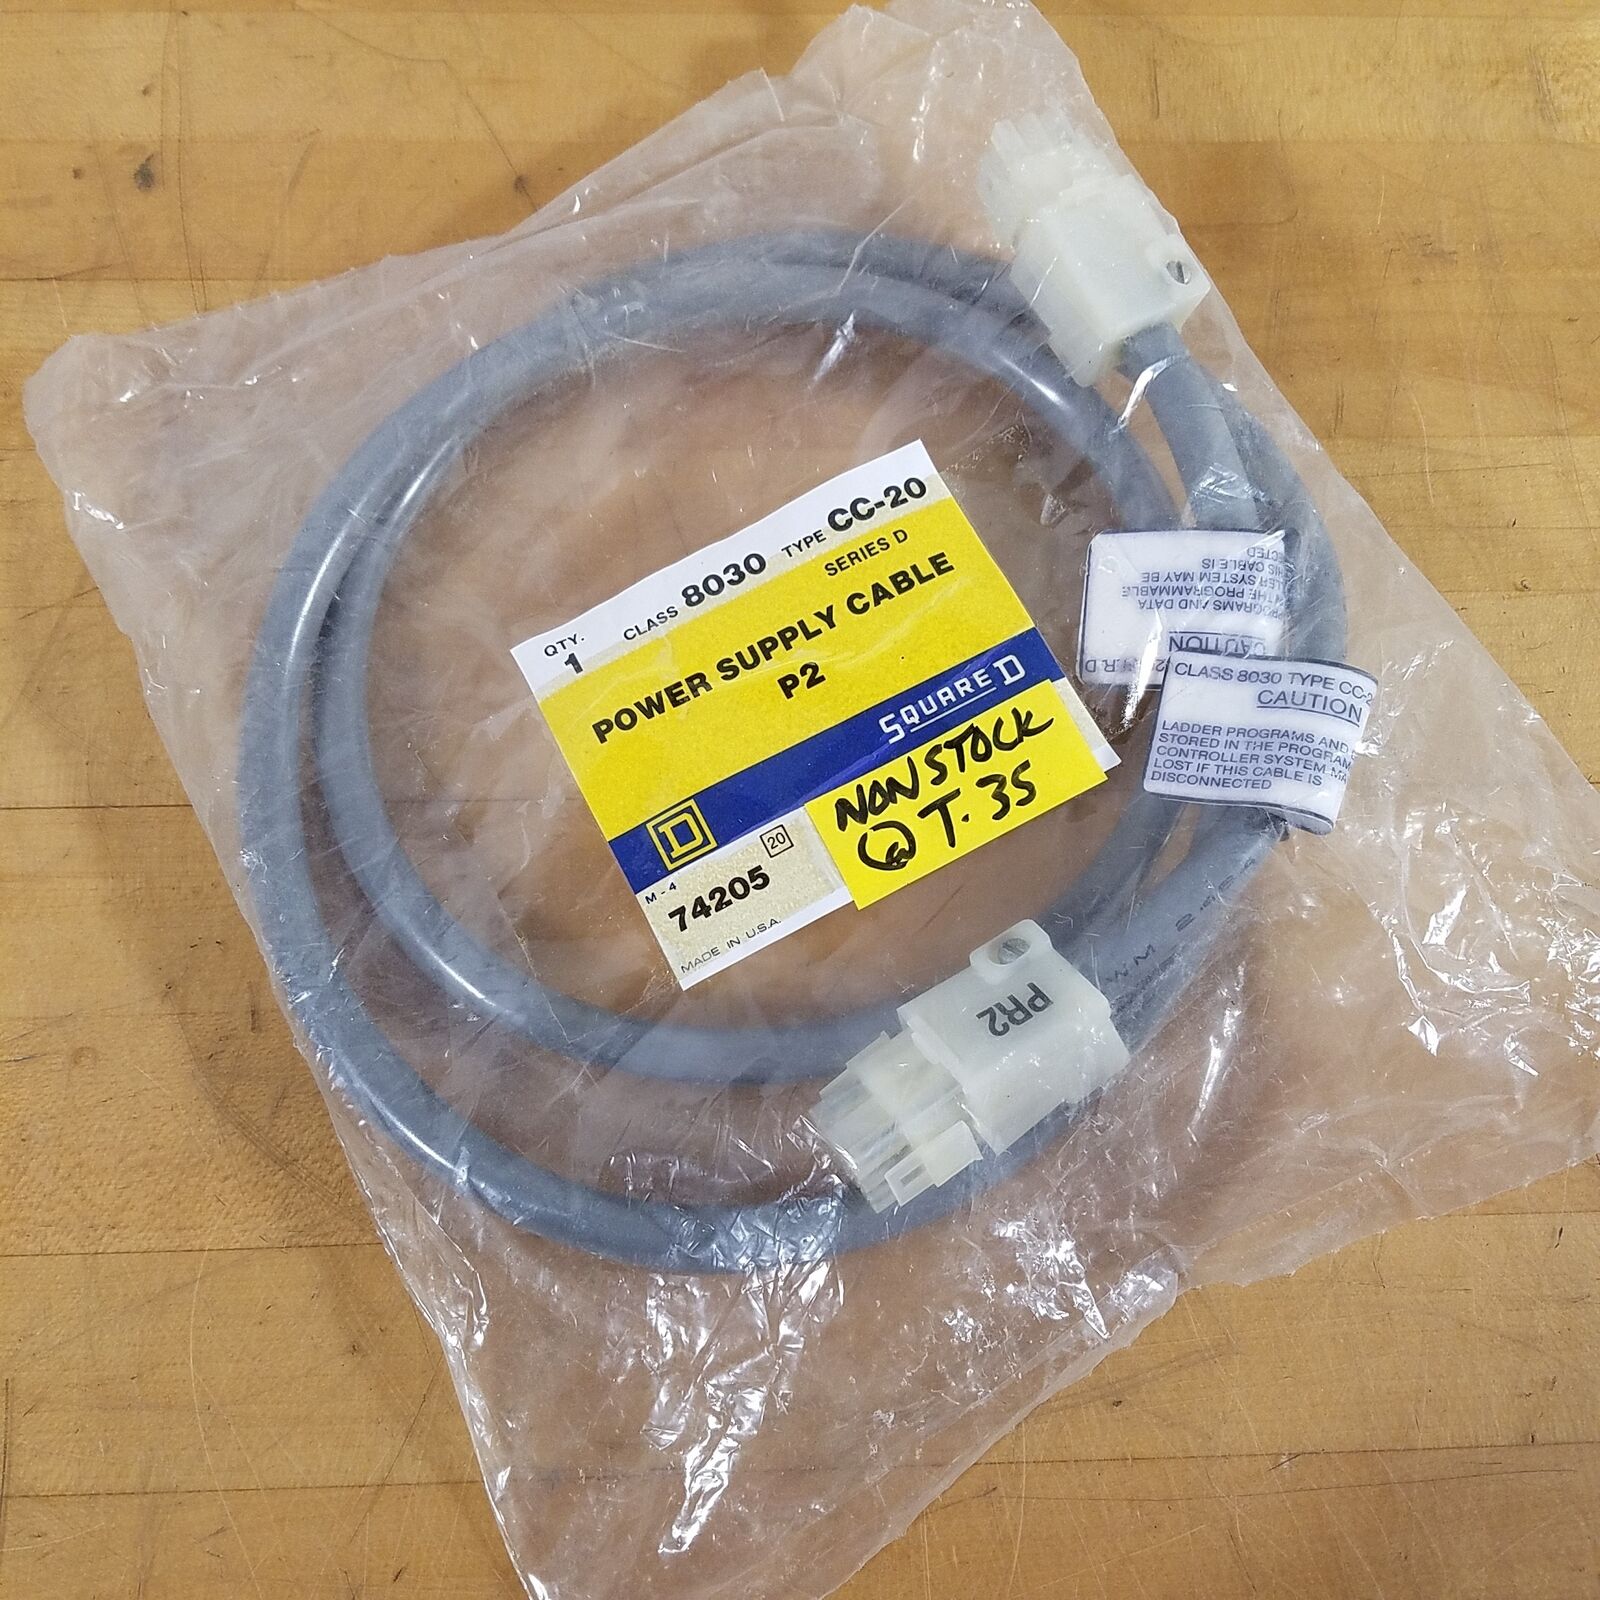 Sy/max 8030-CC-20 Power Cable, 60 Inch, P2 Connector - NEW